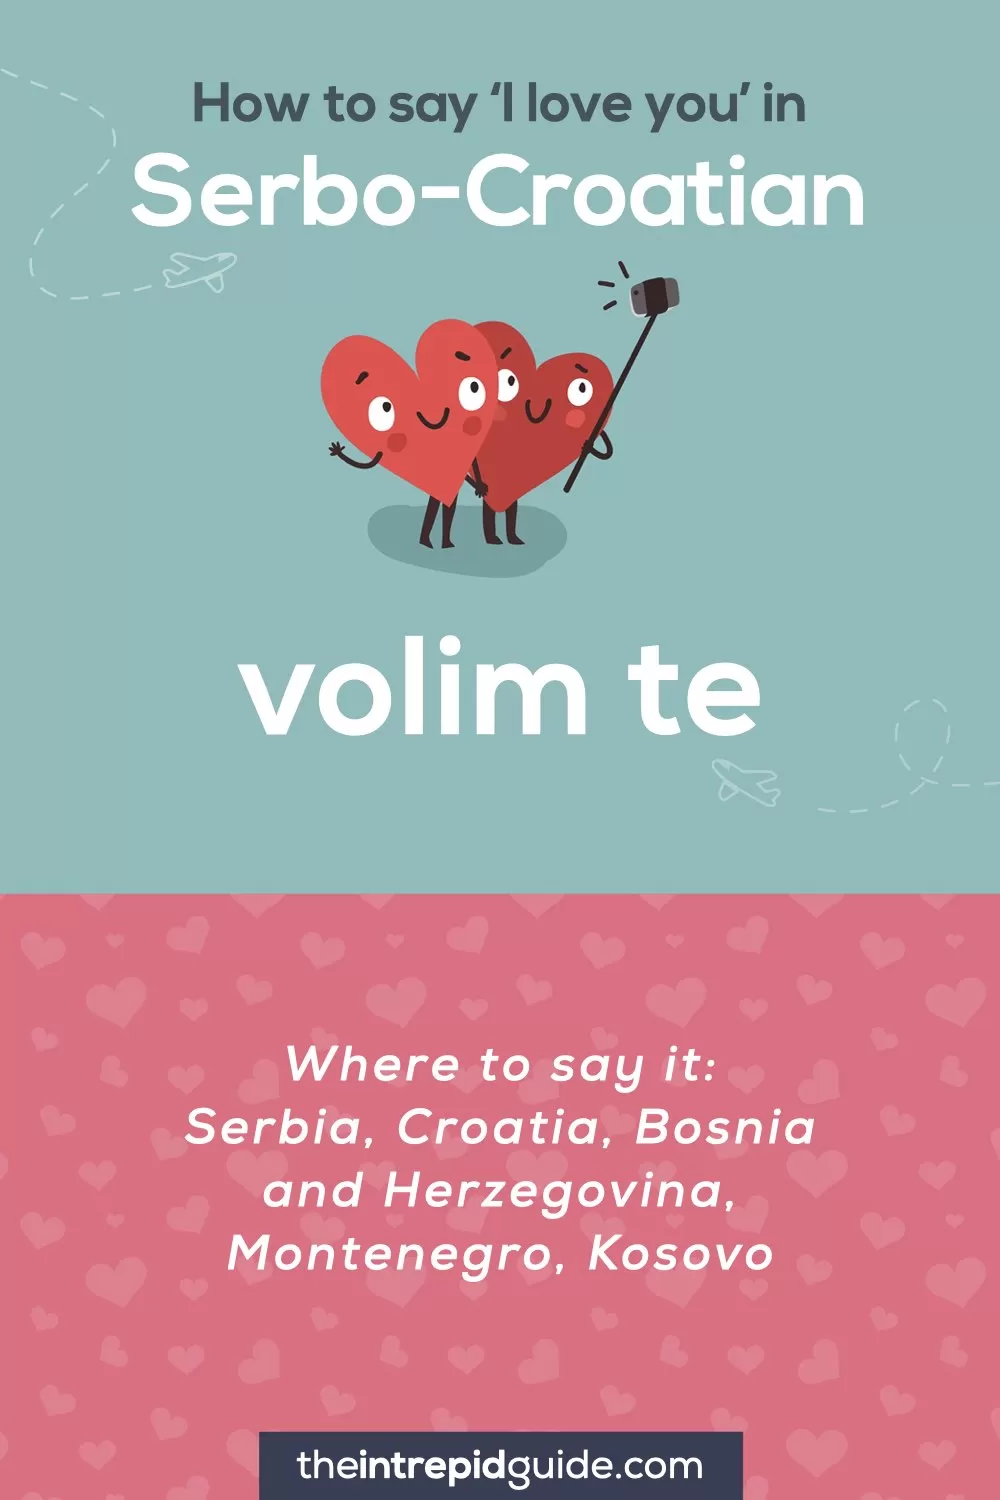 How to say I love you in different languages - Serbo-Croatian - volim te